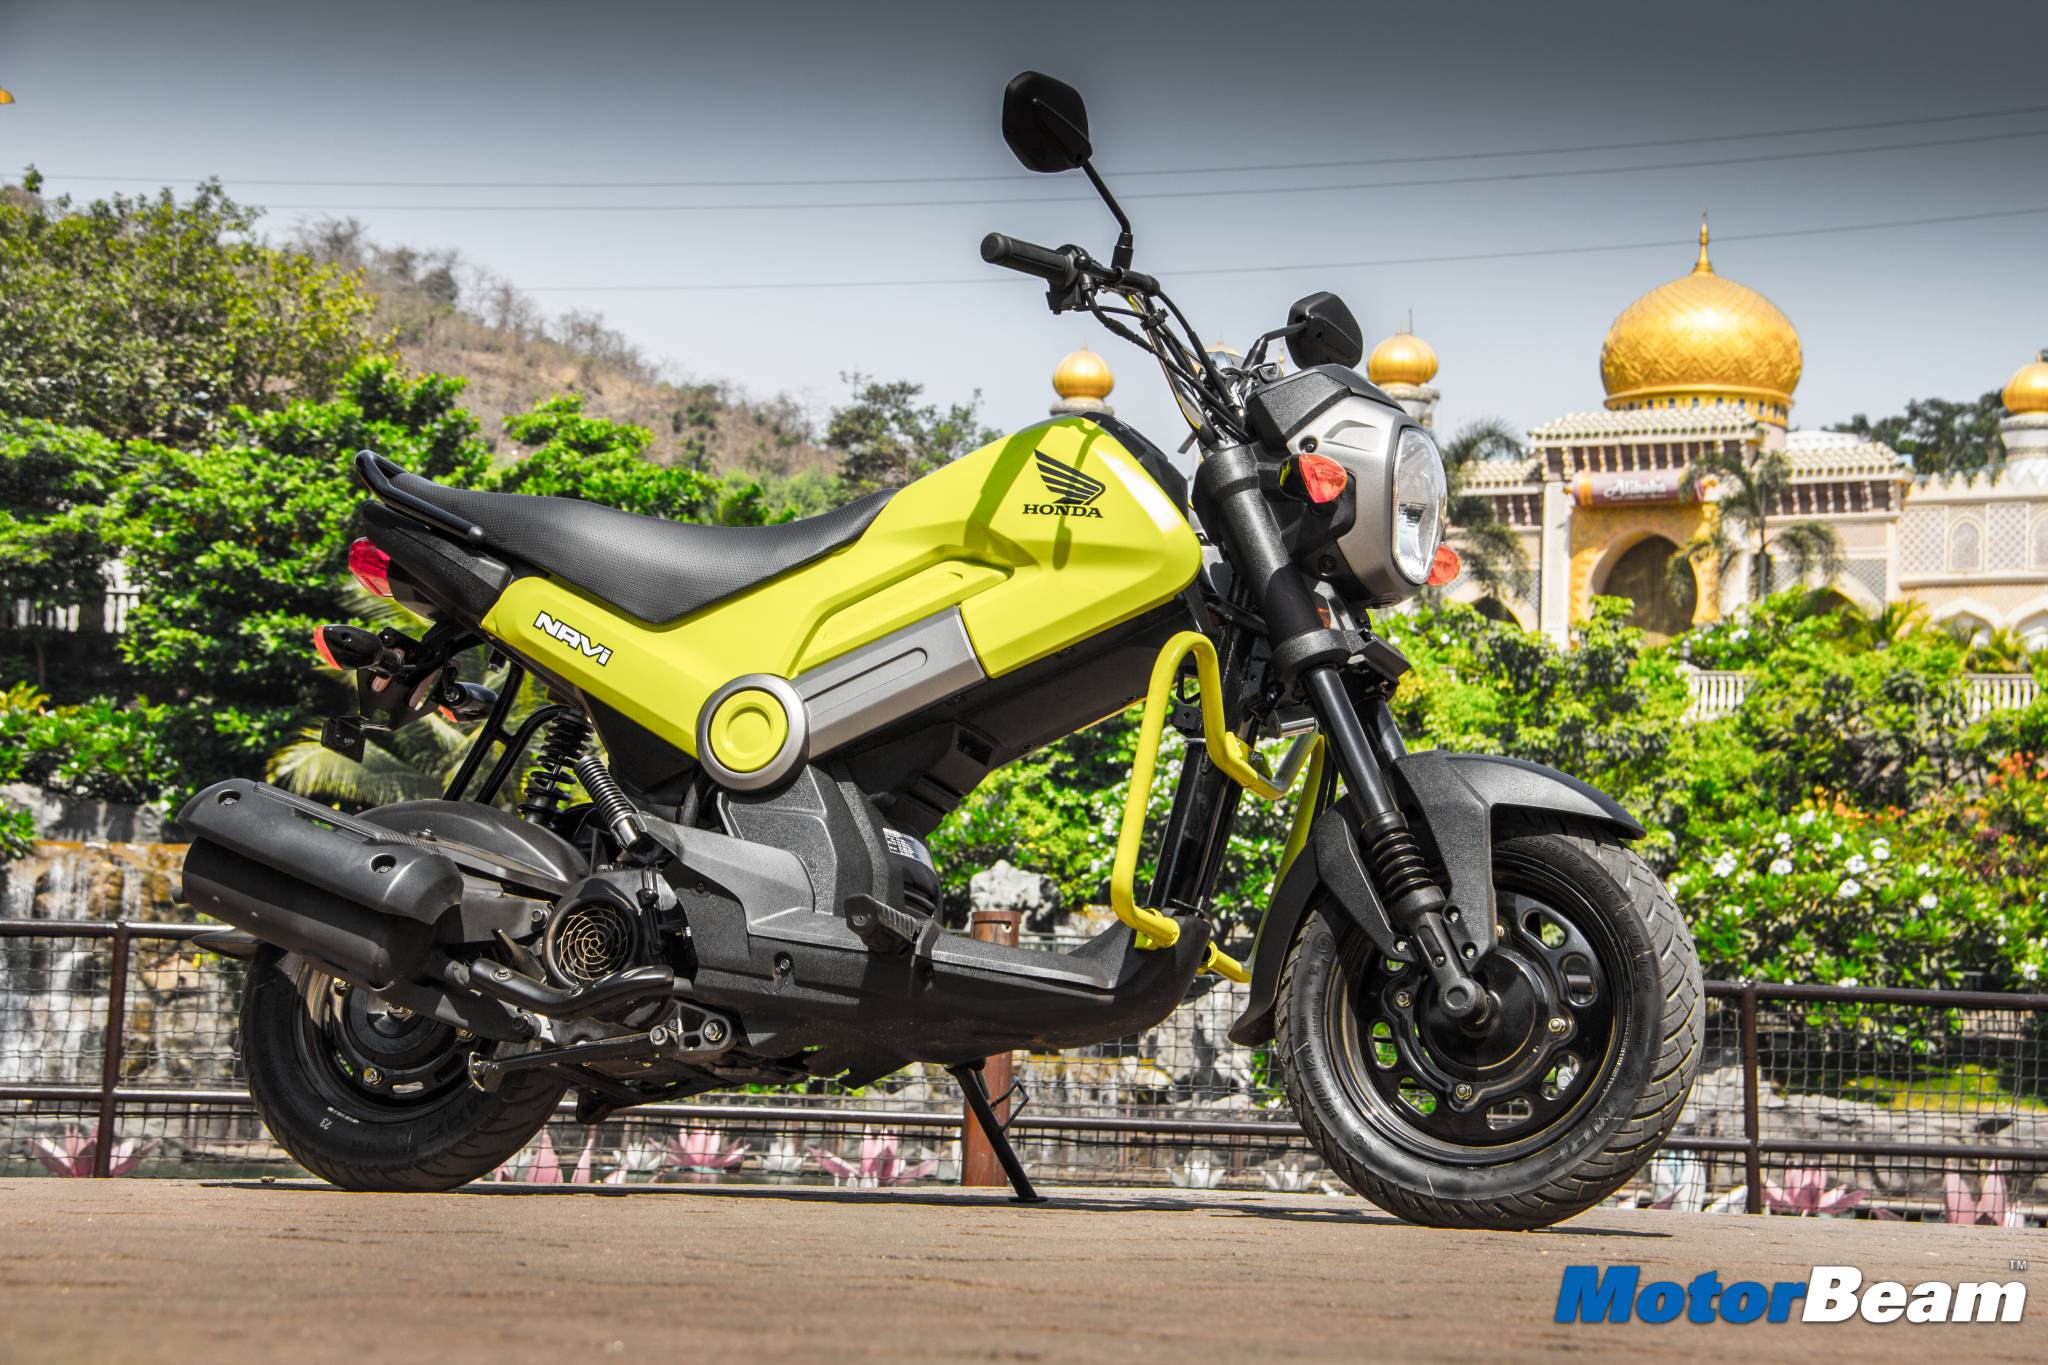 Honda Navi Go Could Be 125cc Version Of Scooter Motorbeam